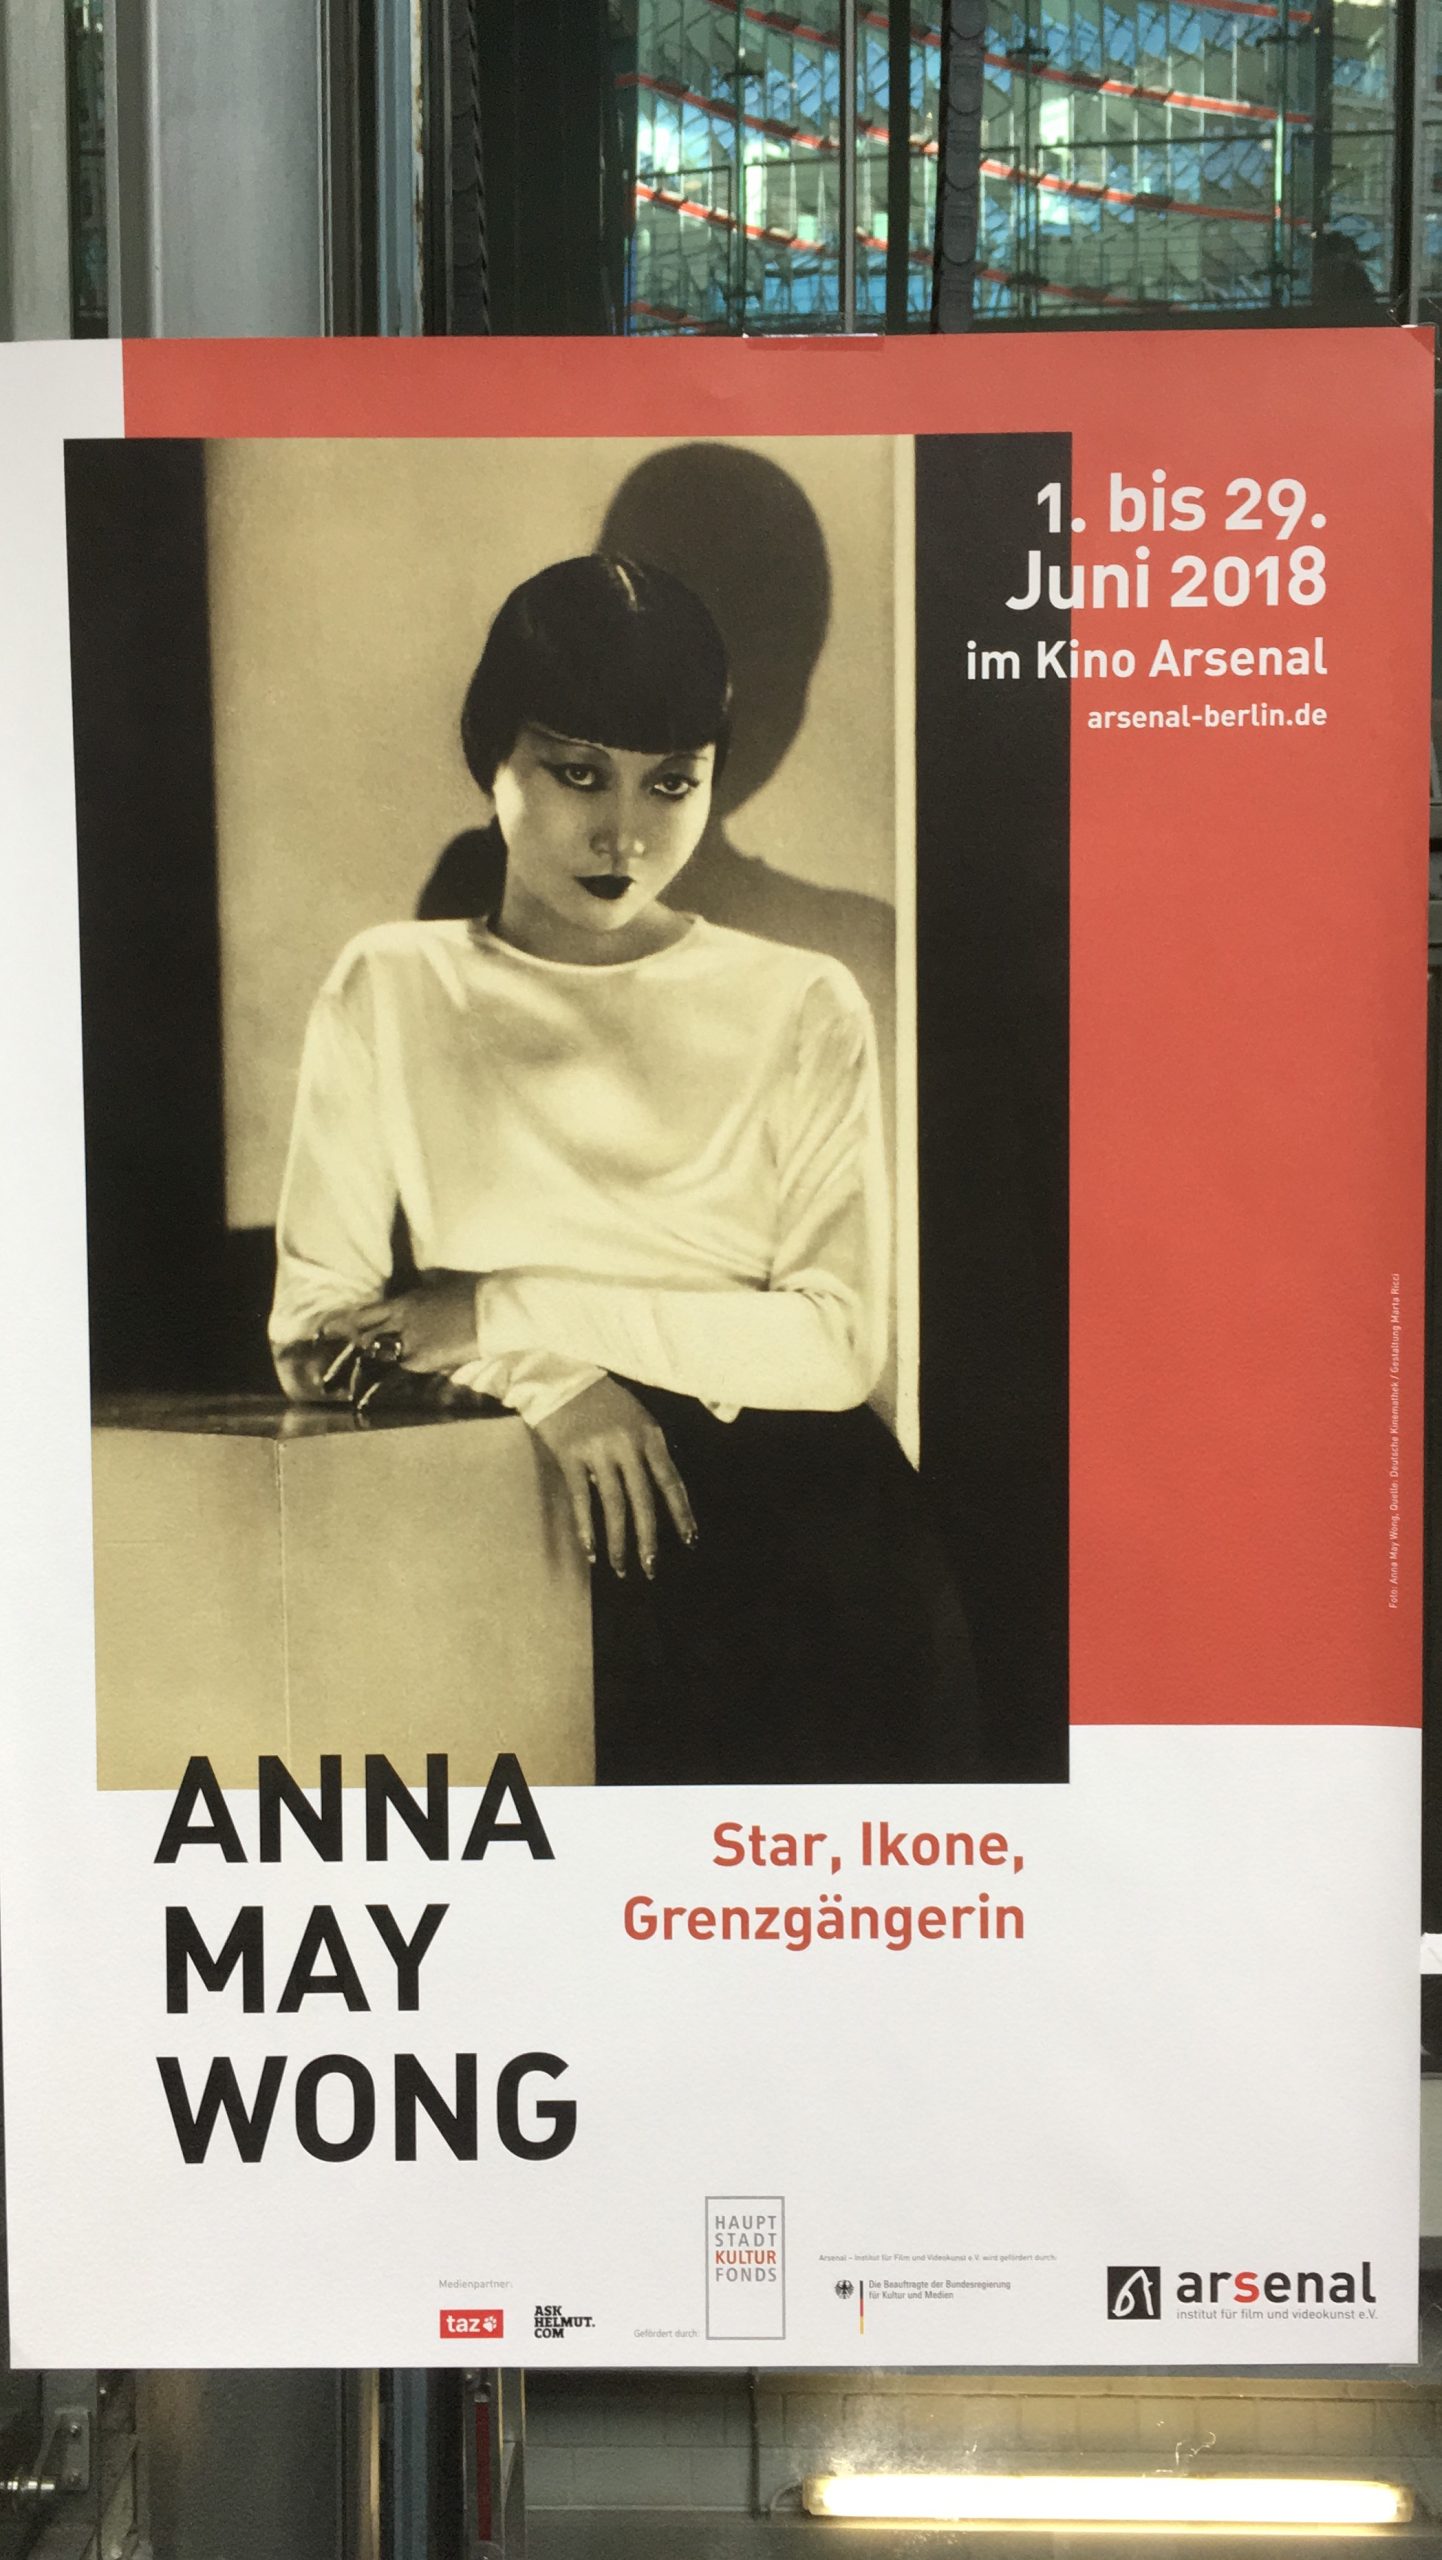 A black, red and white film postcard. There is a black and white picture of Anna May Wong. The caption says “Anna May Wong, Star, Ikone Grenzgängerin” (translated: Anna May Wong, star, icon border crosser). At the top right it says “01. bis 29. Juni 2018 im Kino Arsenal”.